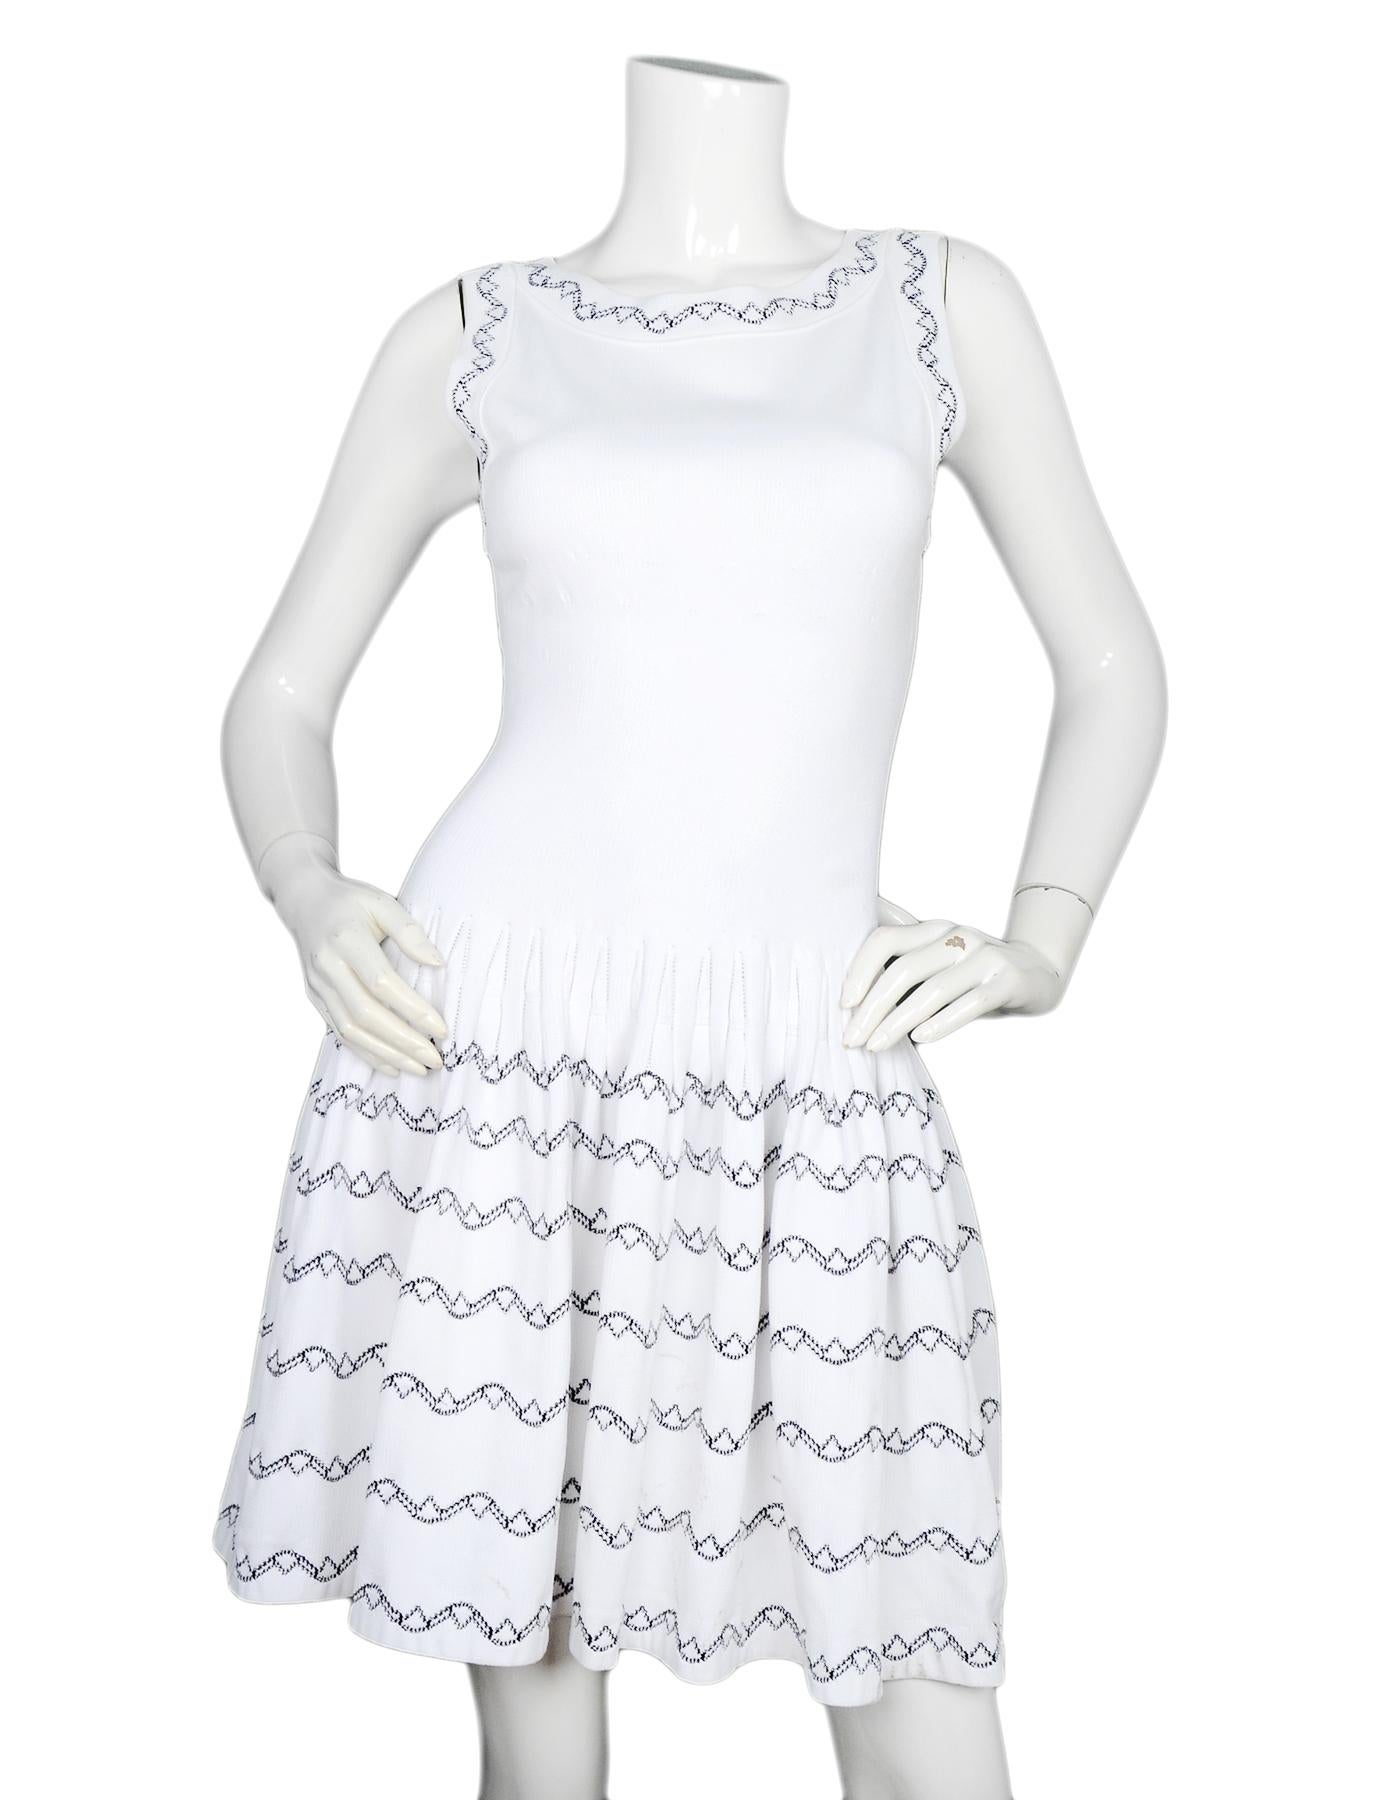 Alaia White Fit & Flare Sleeveless Dress W/ Black Embroidery Sz 40

Made In: Italy
Color: White, black
Materials: 85% viscose, 12% polyester, 3% cotton
Opening/Closure: Hidden back zip 
Overall Condition: Good pre-owned condition with excpetion of